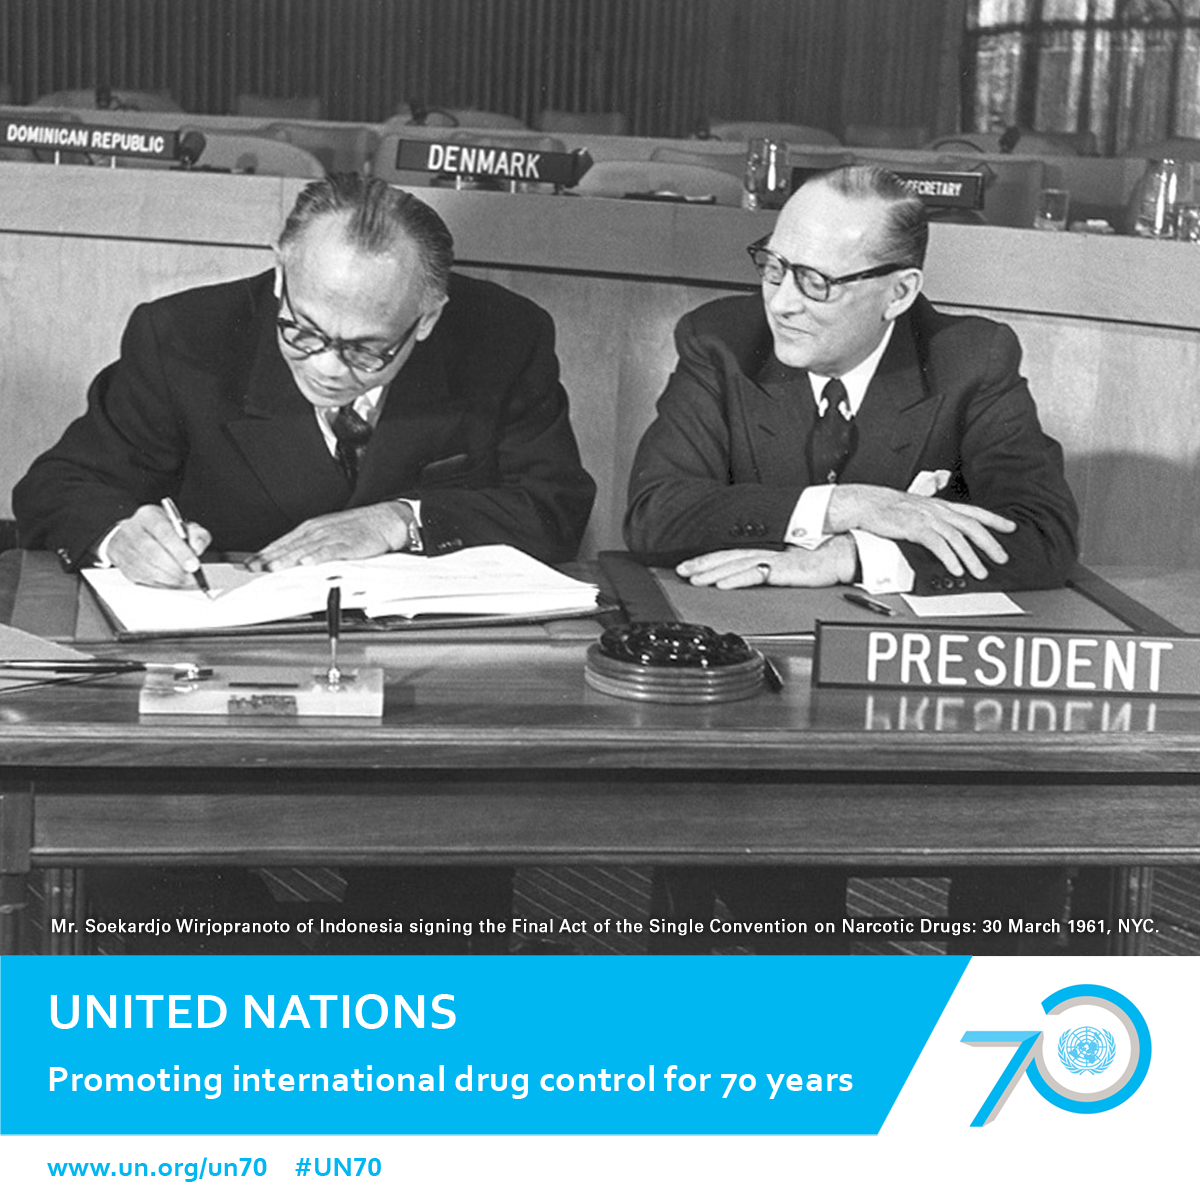 Mr. Soekardjo Wirjopranoto of Indonesia signing the Final Act of the Single Convention on Narcotic Drugs: 30 march 1961, NYC.